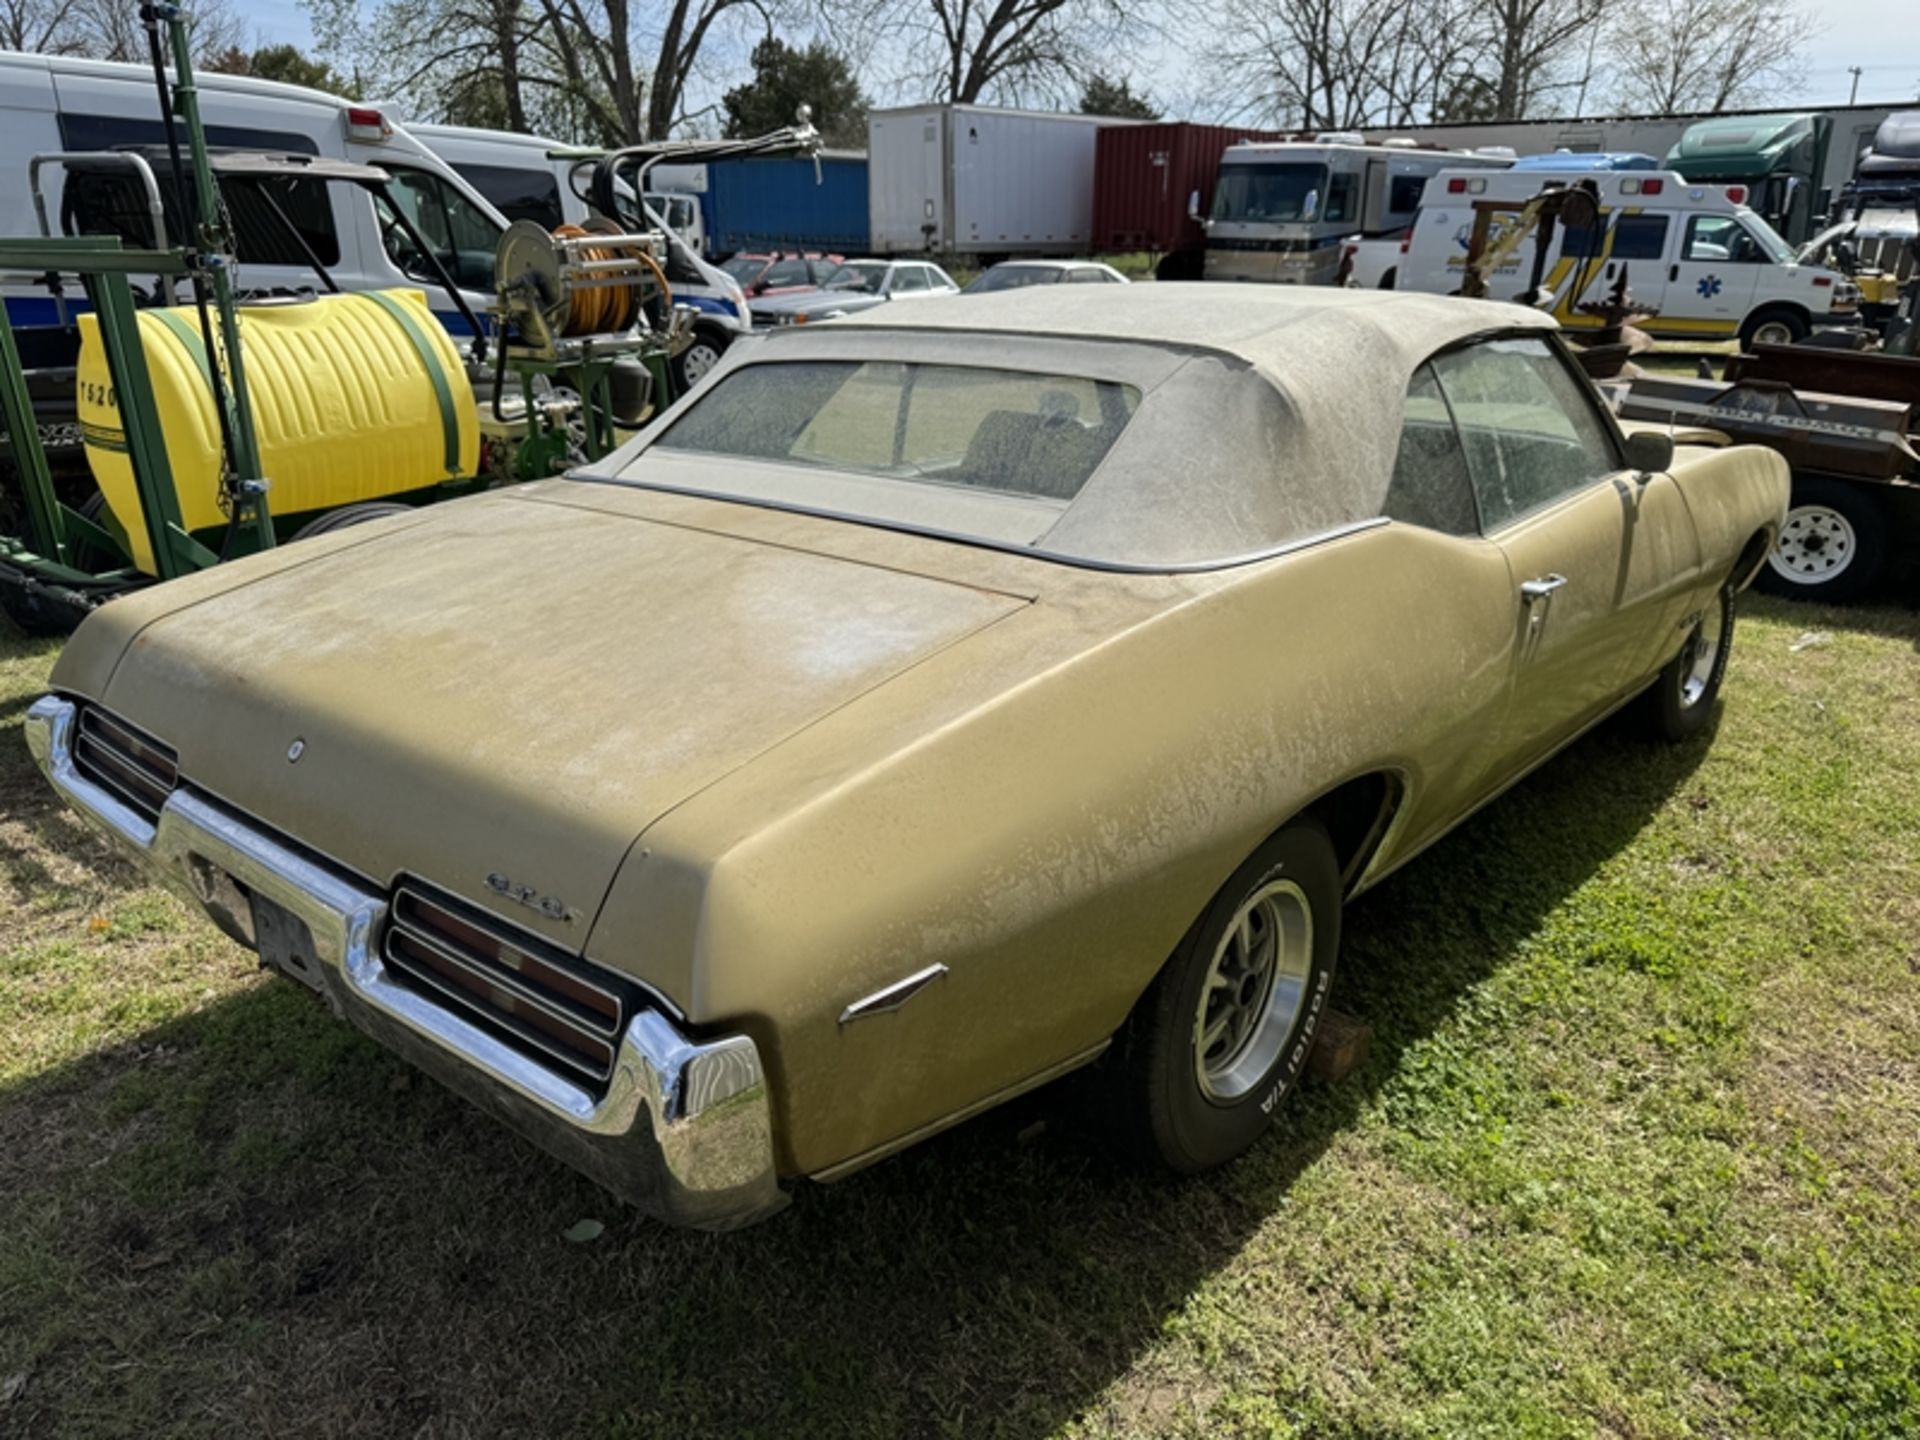 1969 PONTIAC GTO convertible - engine rebuilt and modified, but not hooked up completely - mileage - Image 3 of 13